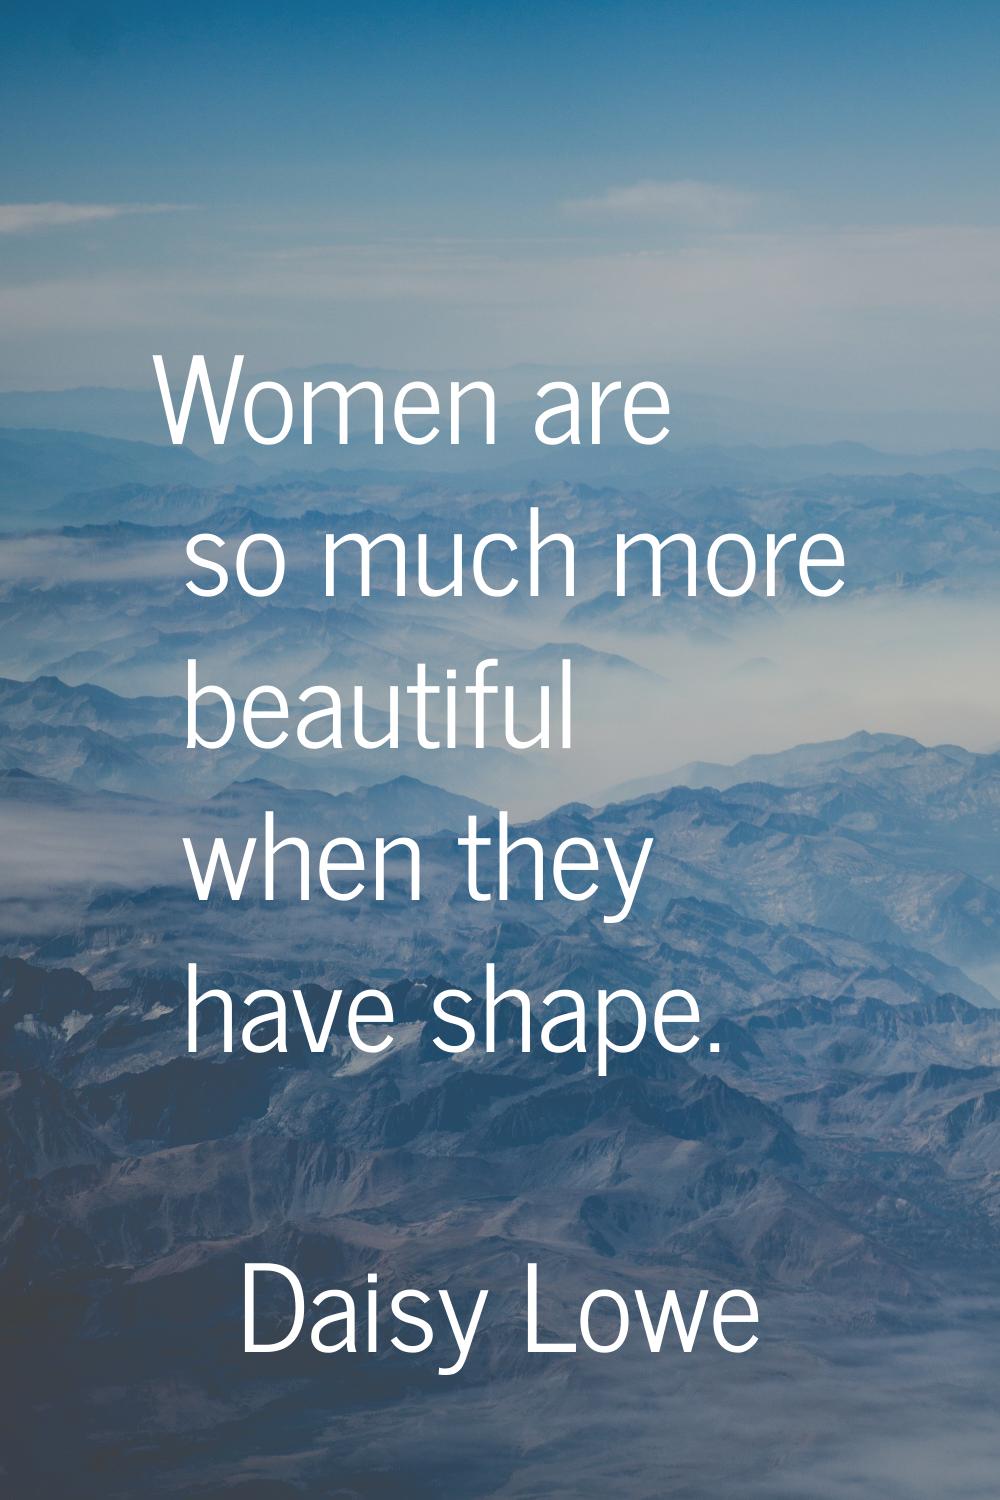 Women are so much more beautiful when they have shape.